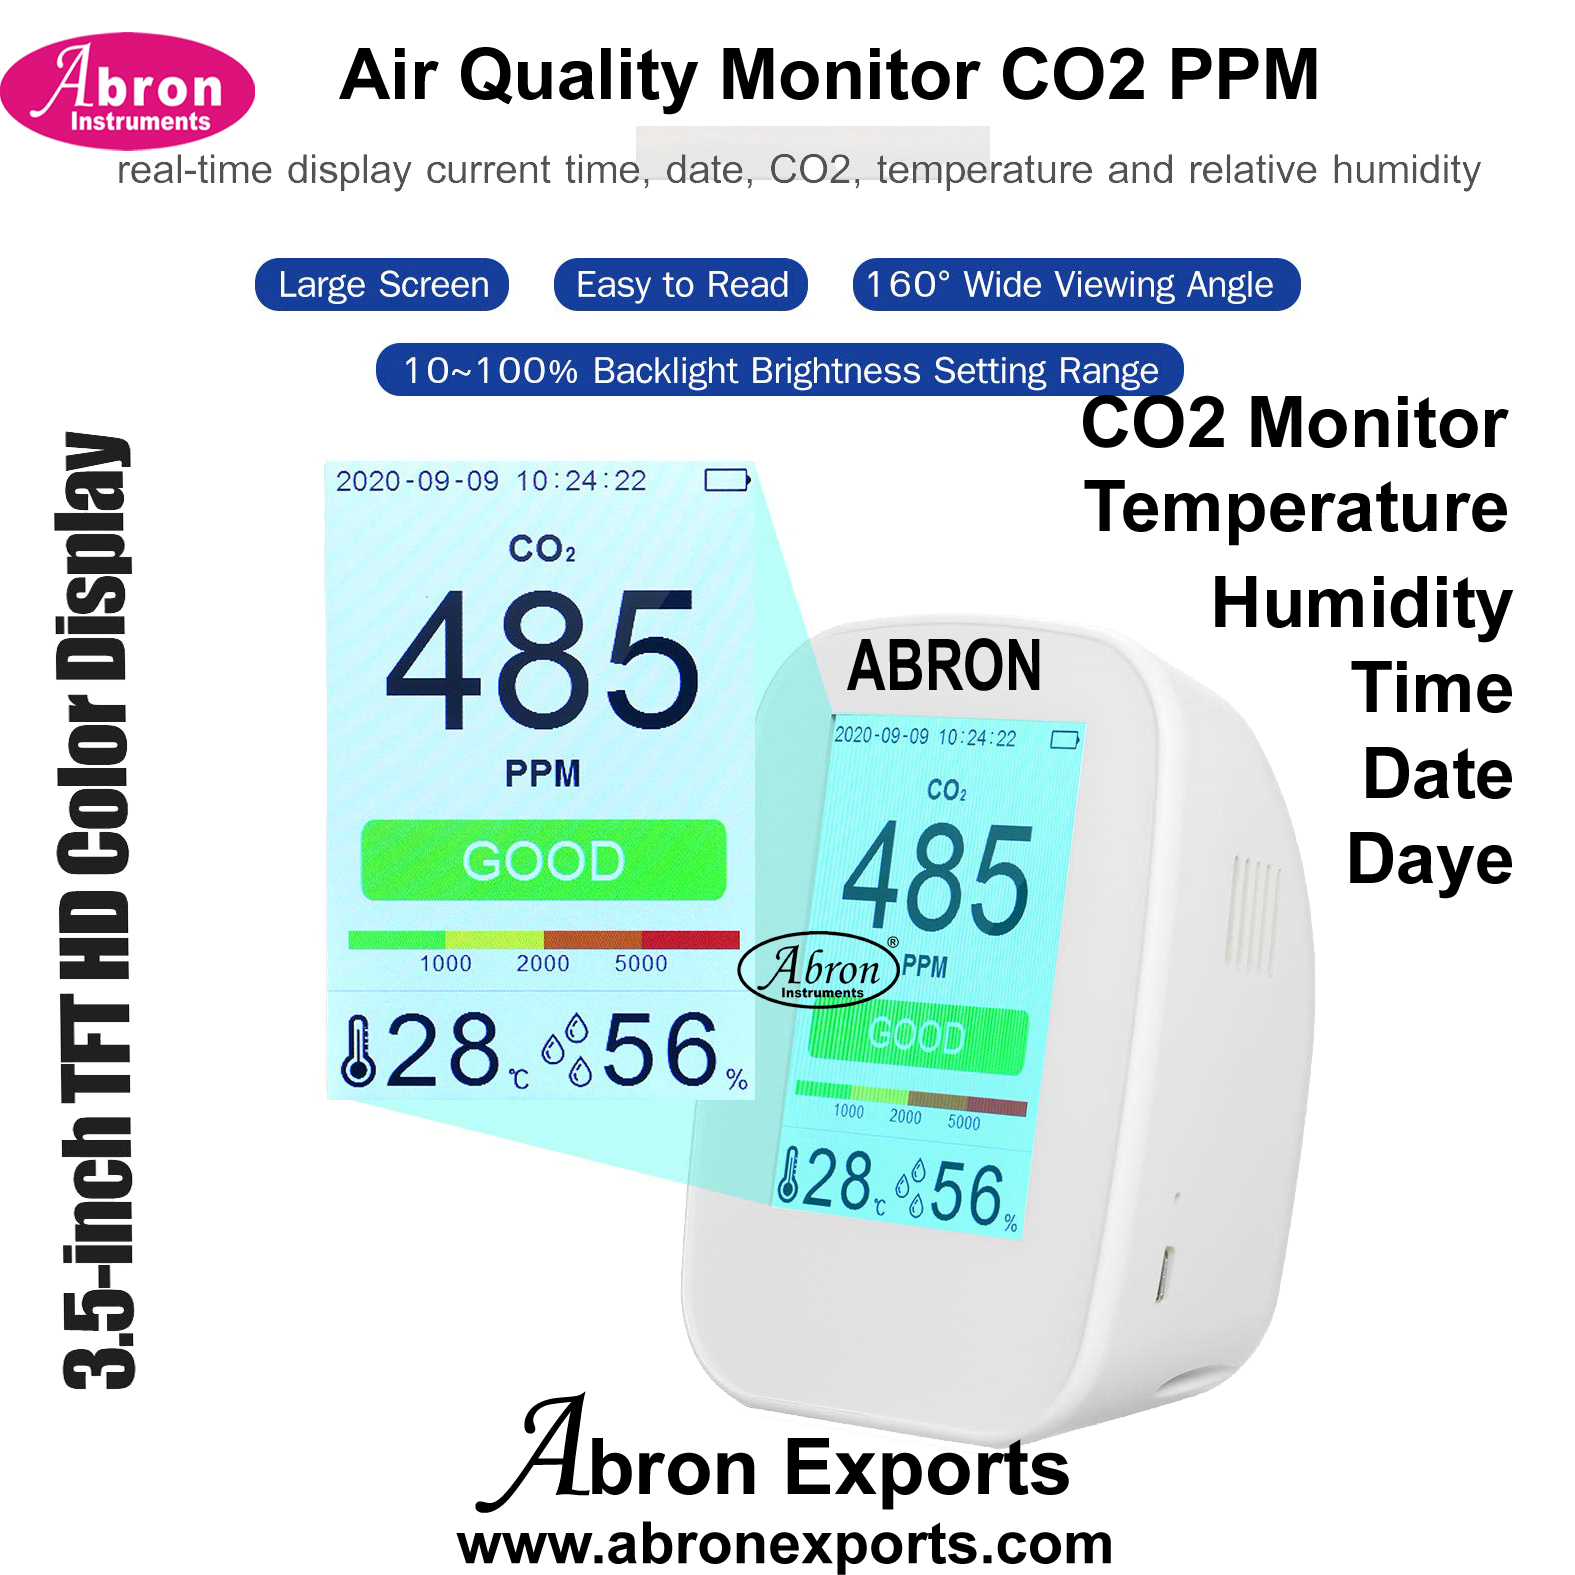 Air Quality Monitor Digital CO2 meter table RH Humidity Temperature Detector Indoor Outdoor Monitor Tester Data Abron AM-130AQRHC 